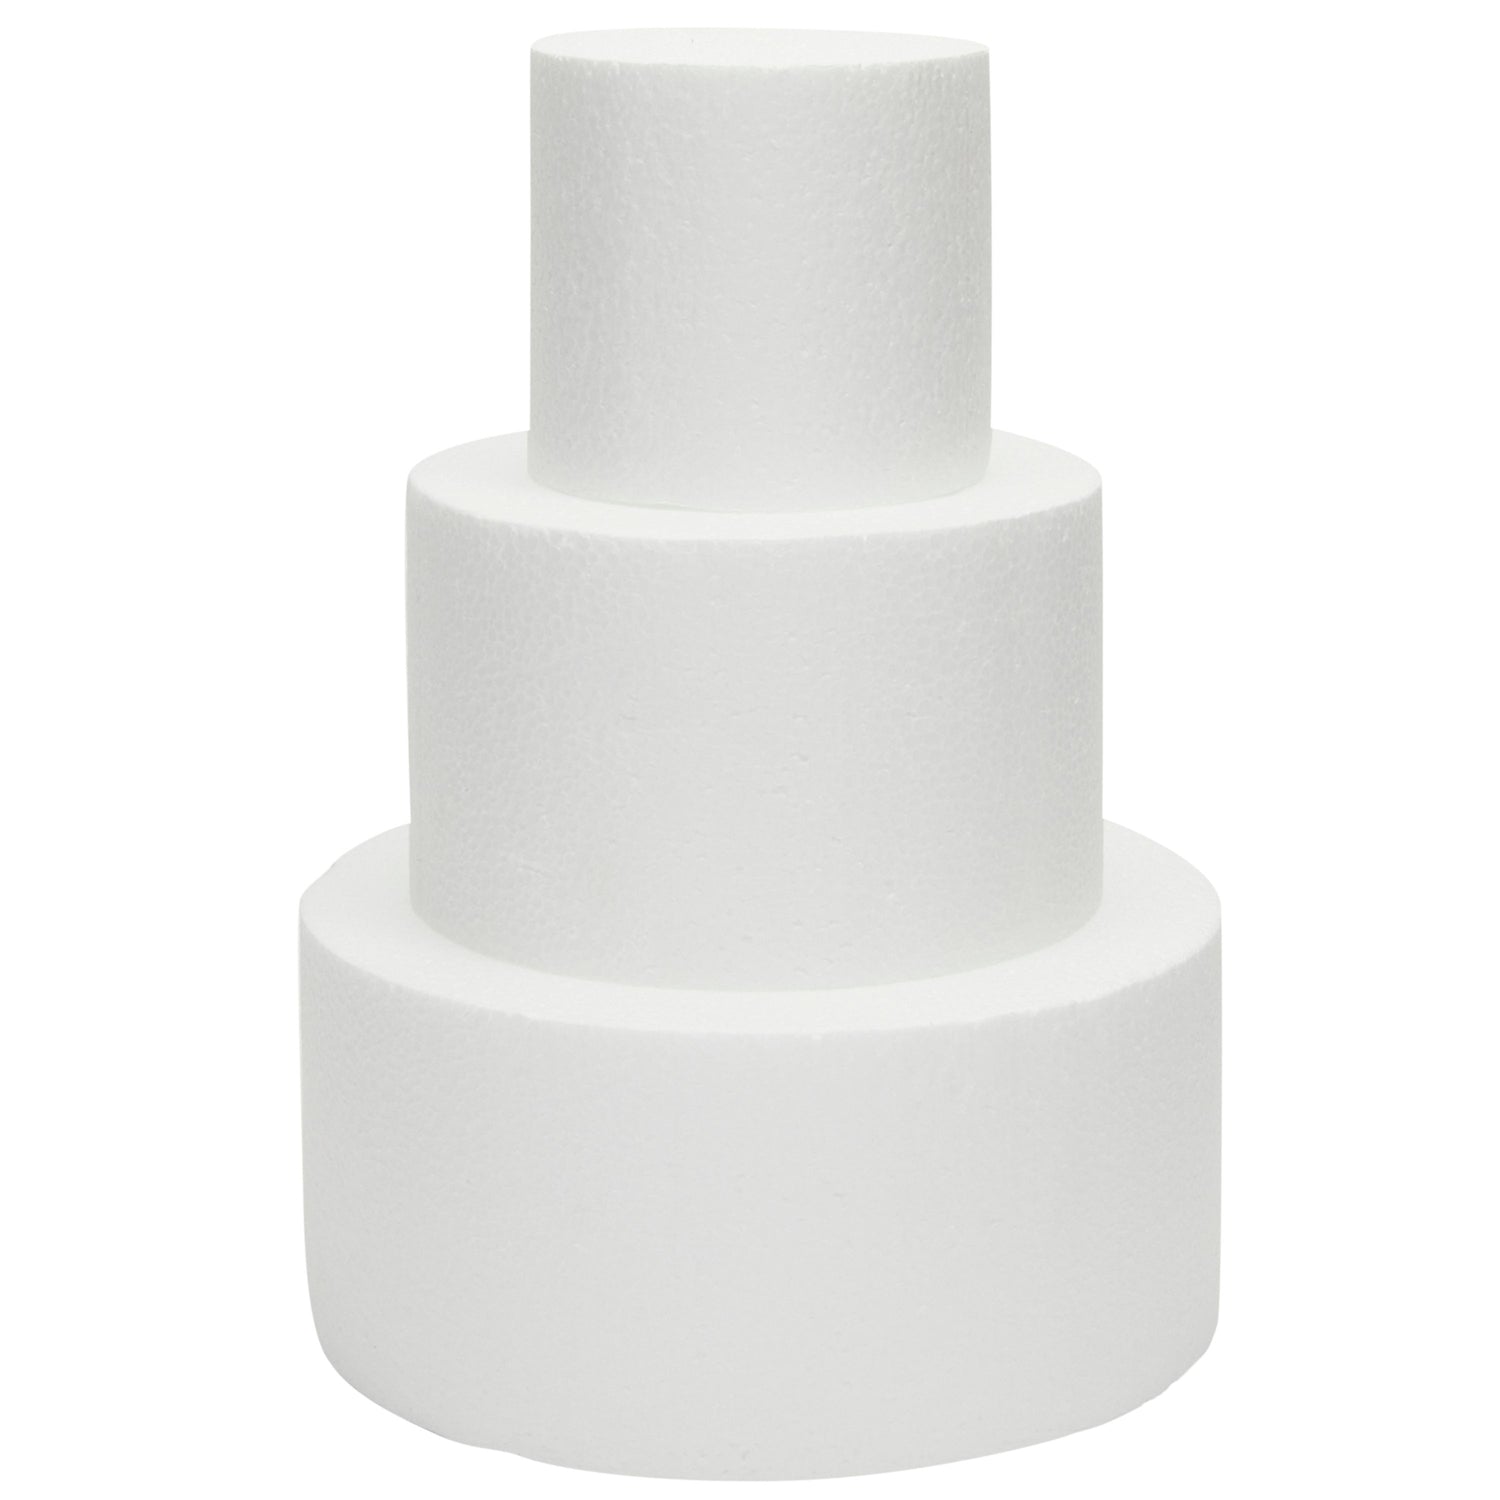 Small Foam Cake Dummy for Decorating and Wedding Display, 3 Tiers (10.8 Inches Tall)